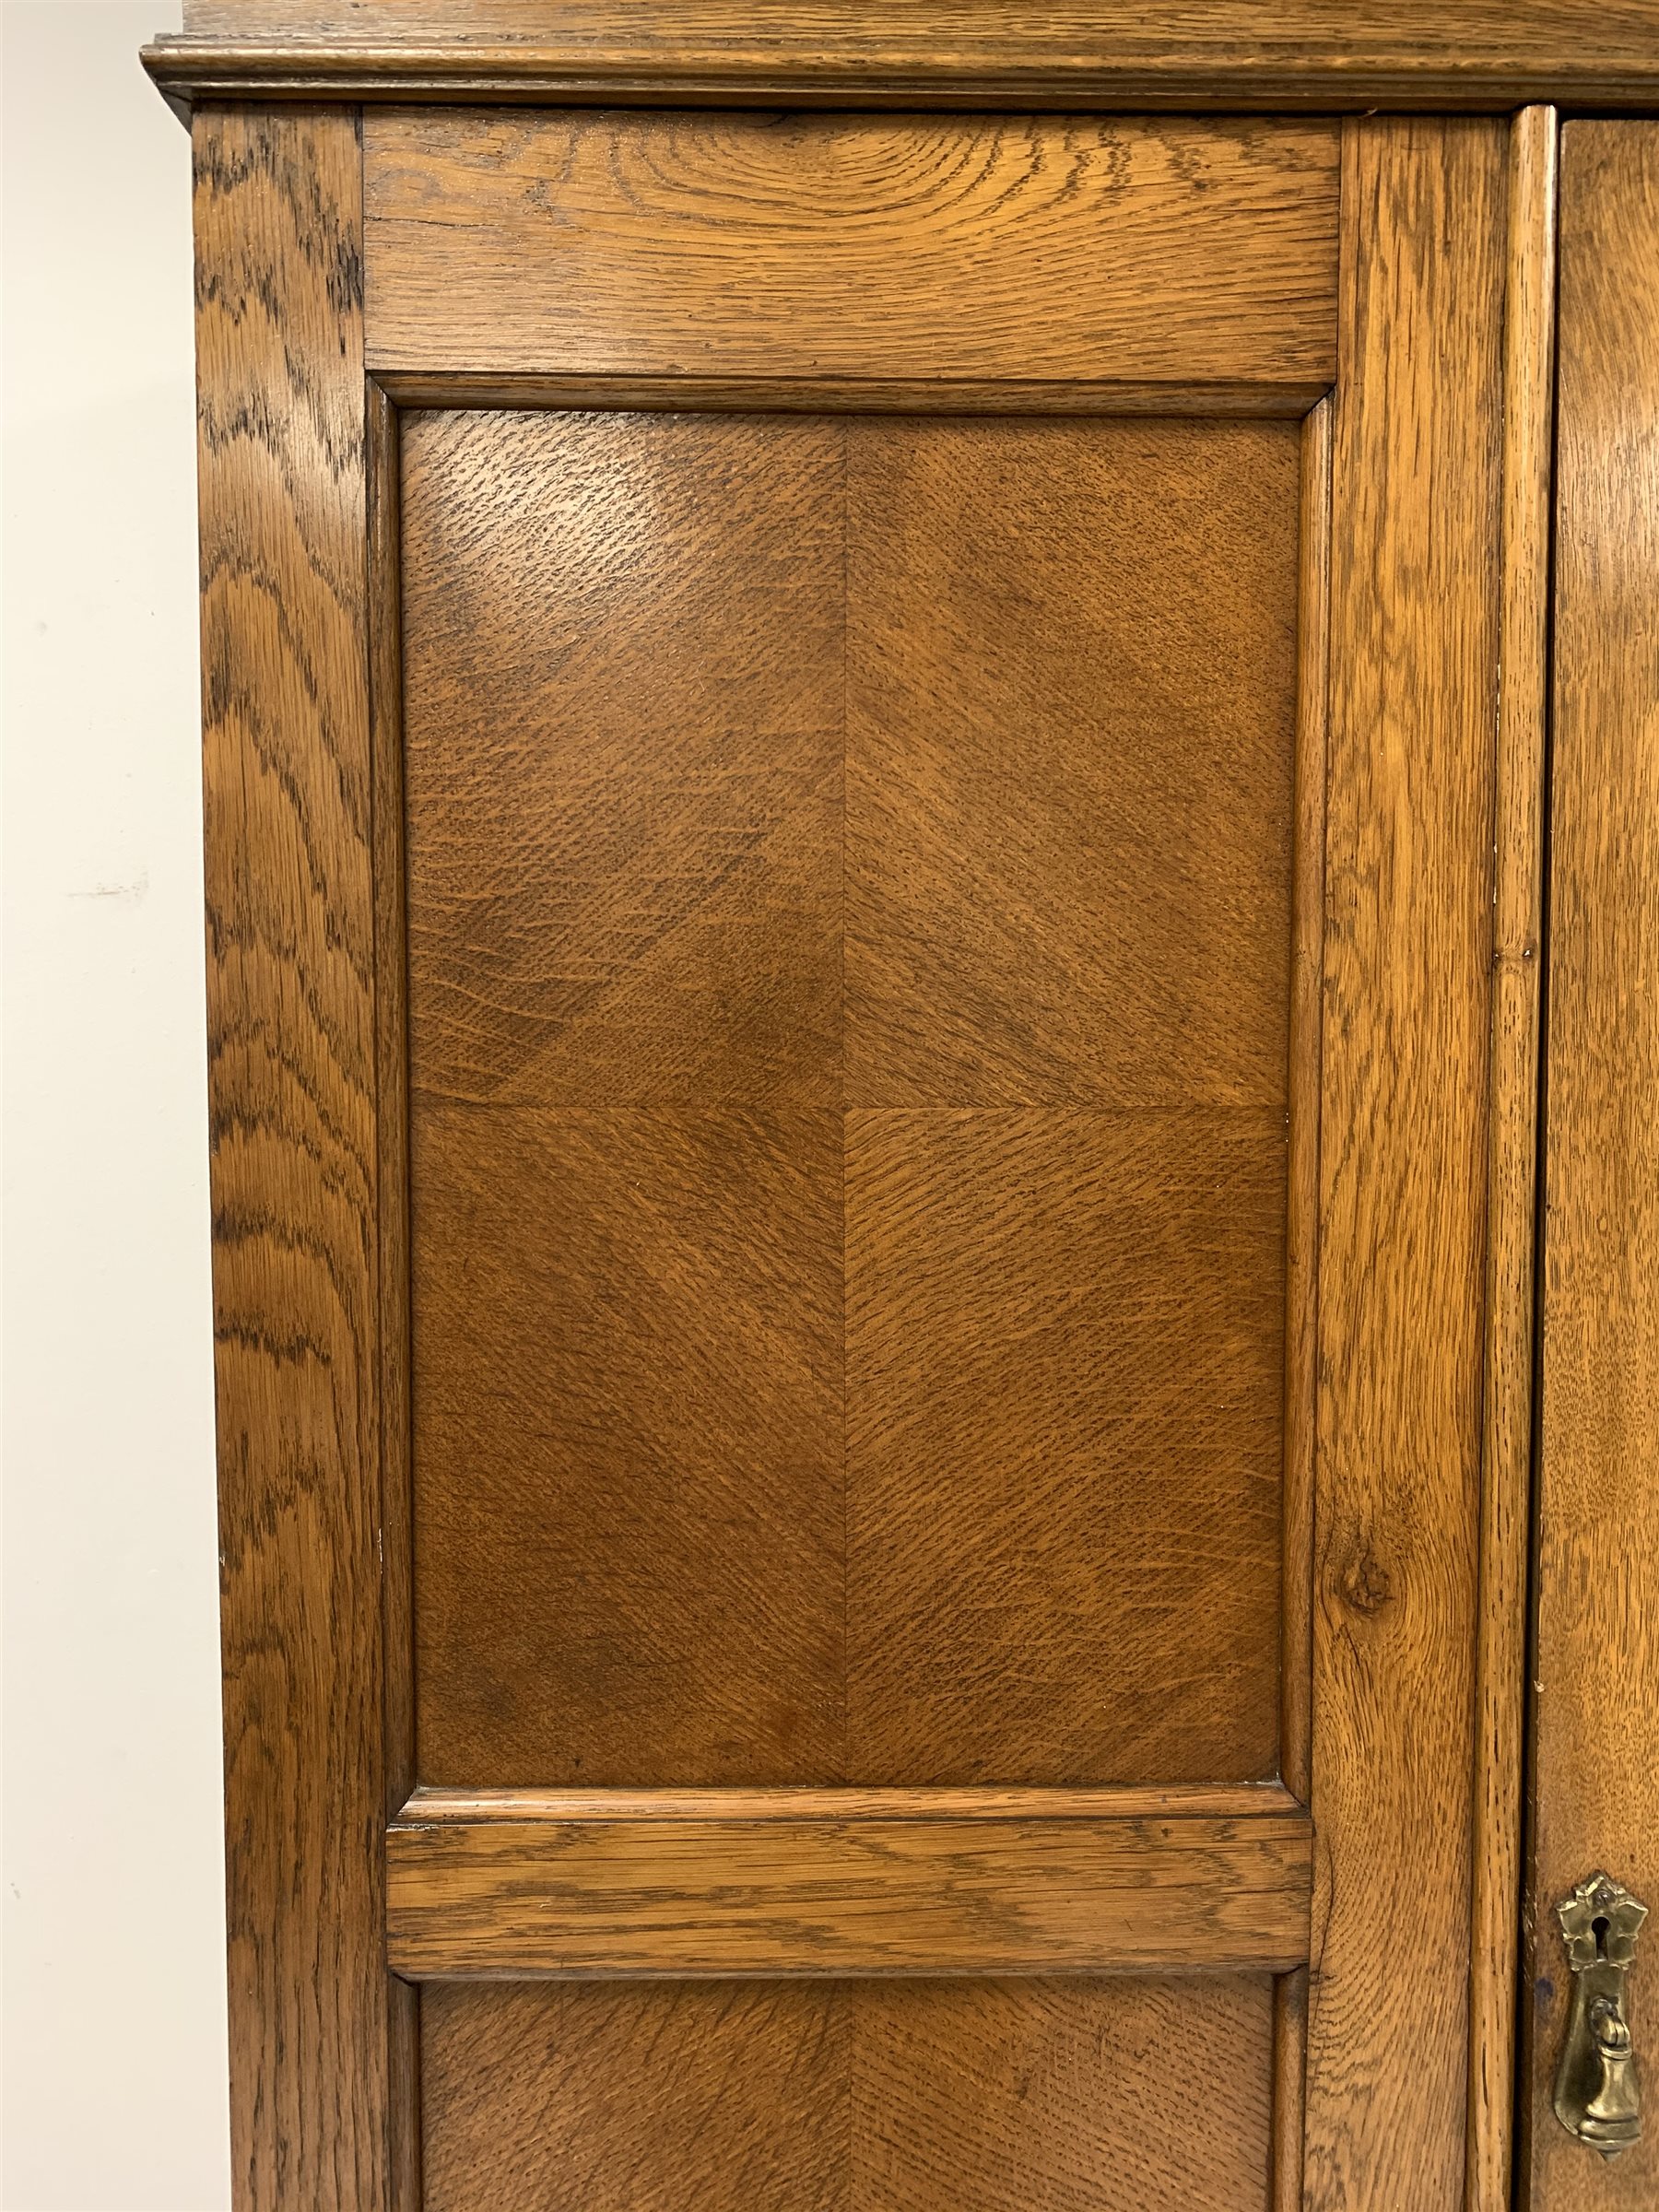 Early 20th century panelled oak wardrobe, projecting cornice over single bevel edged mirror glazed d - Image 3 of 5